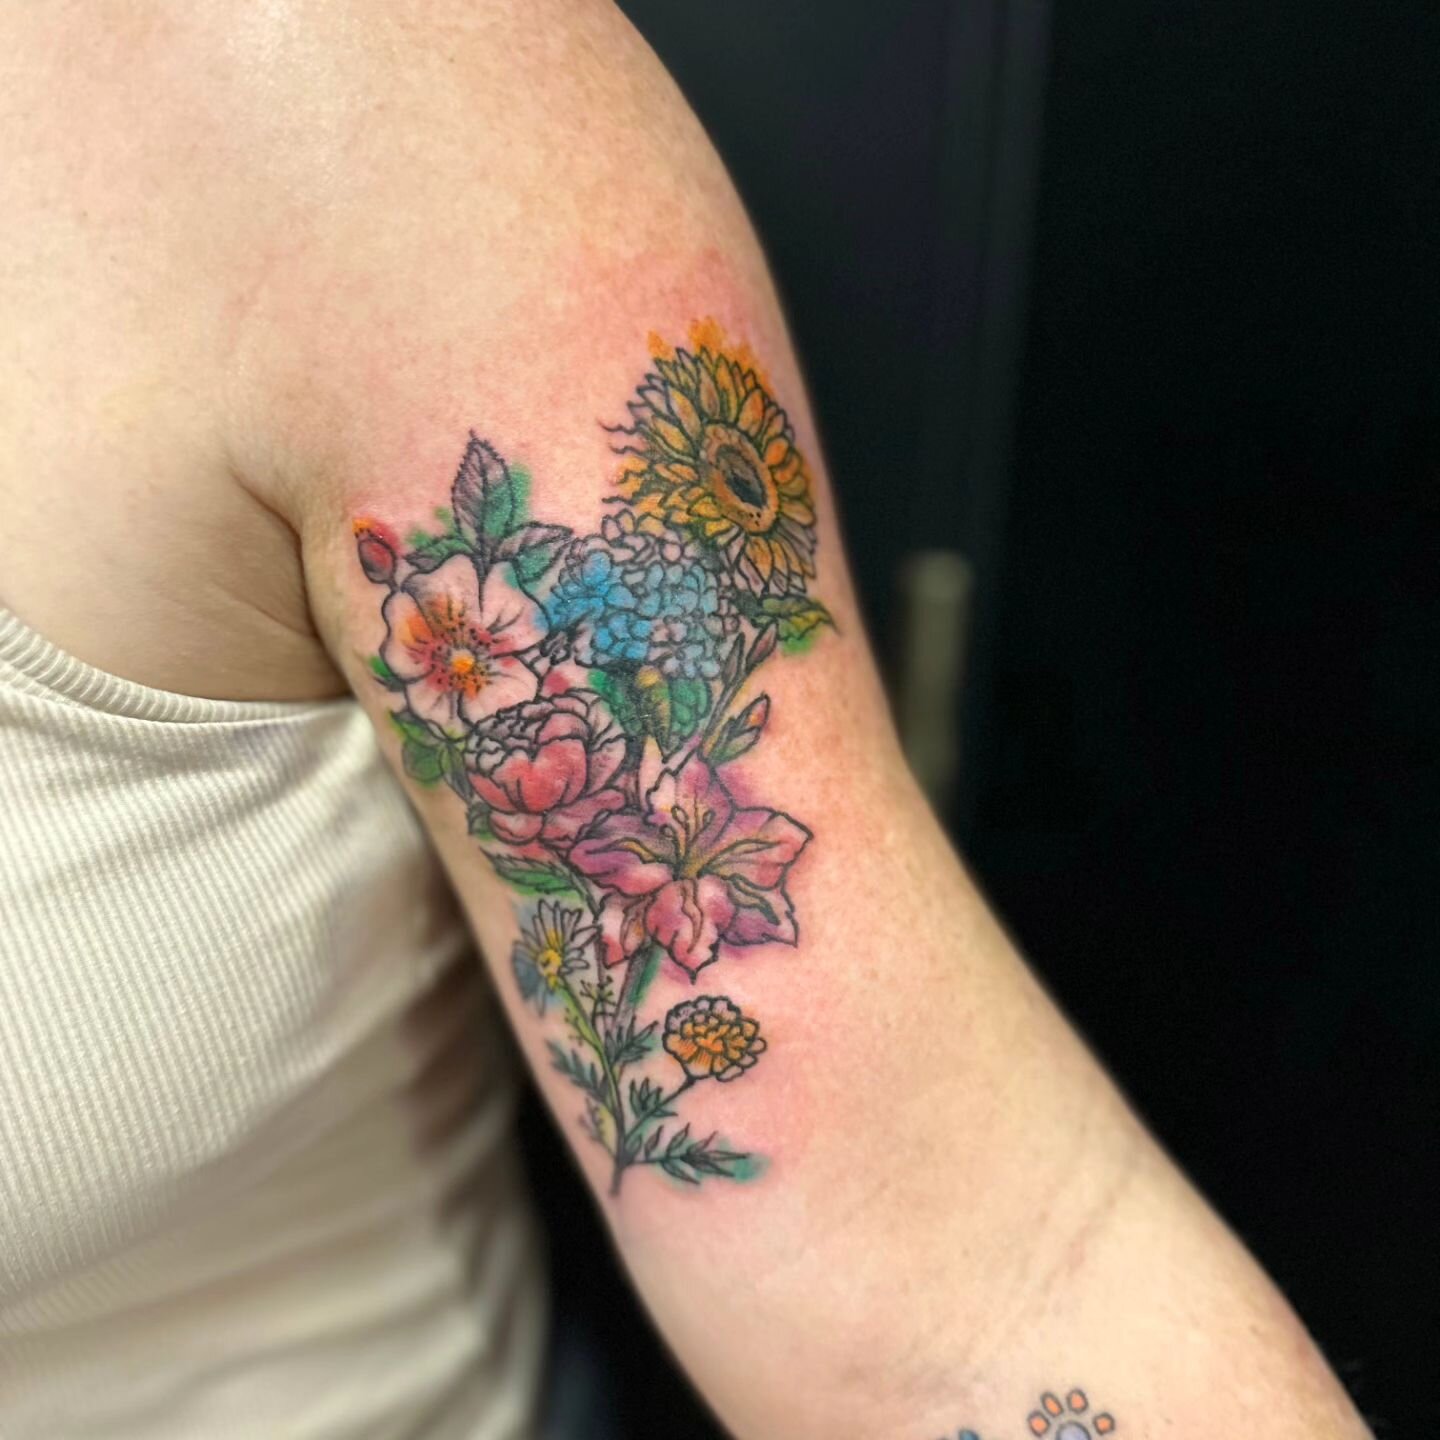 Got to sit down with Alyson this weekend and work on this floral family bouquet, which came out fantastic 🤩. 
.
.
Follow @rogue_tattoopgh
.

.
.
.
.
.
.
.
.

#412 #tattooflash #pittsburghartist #tattooart #tattooer #pittsburghtattoo #tattoo #boldwil